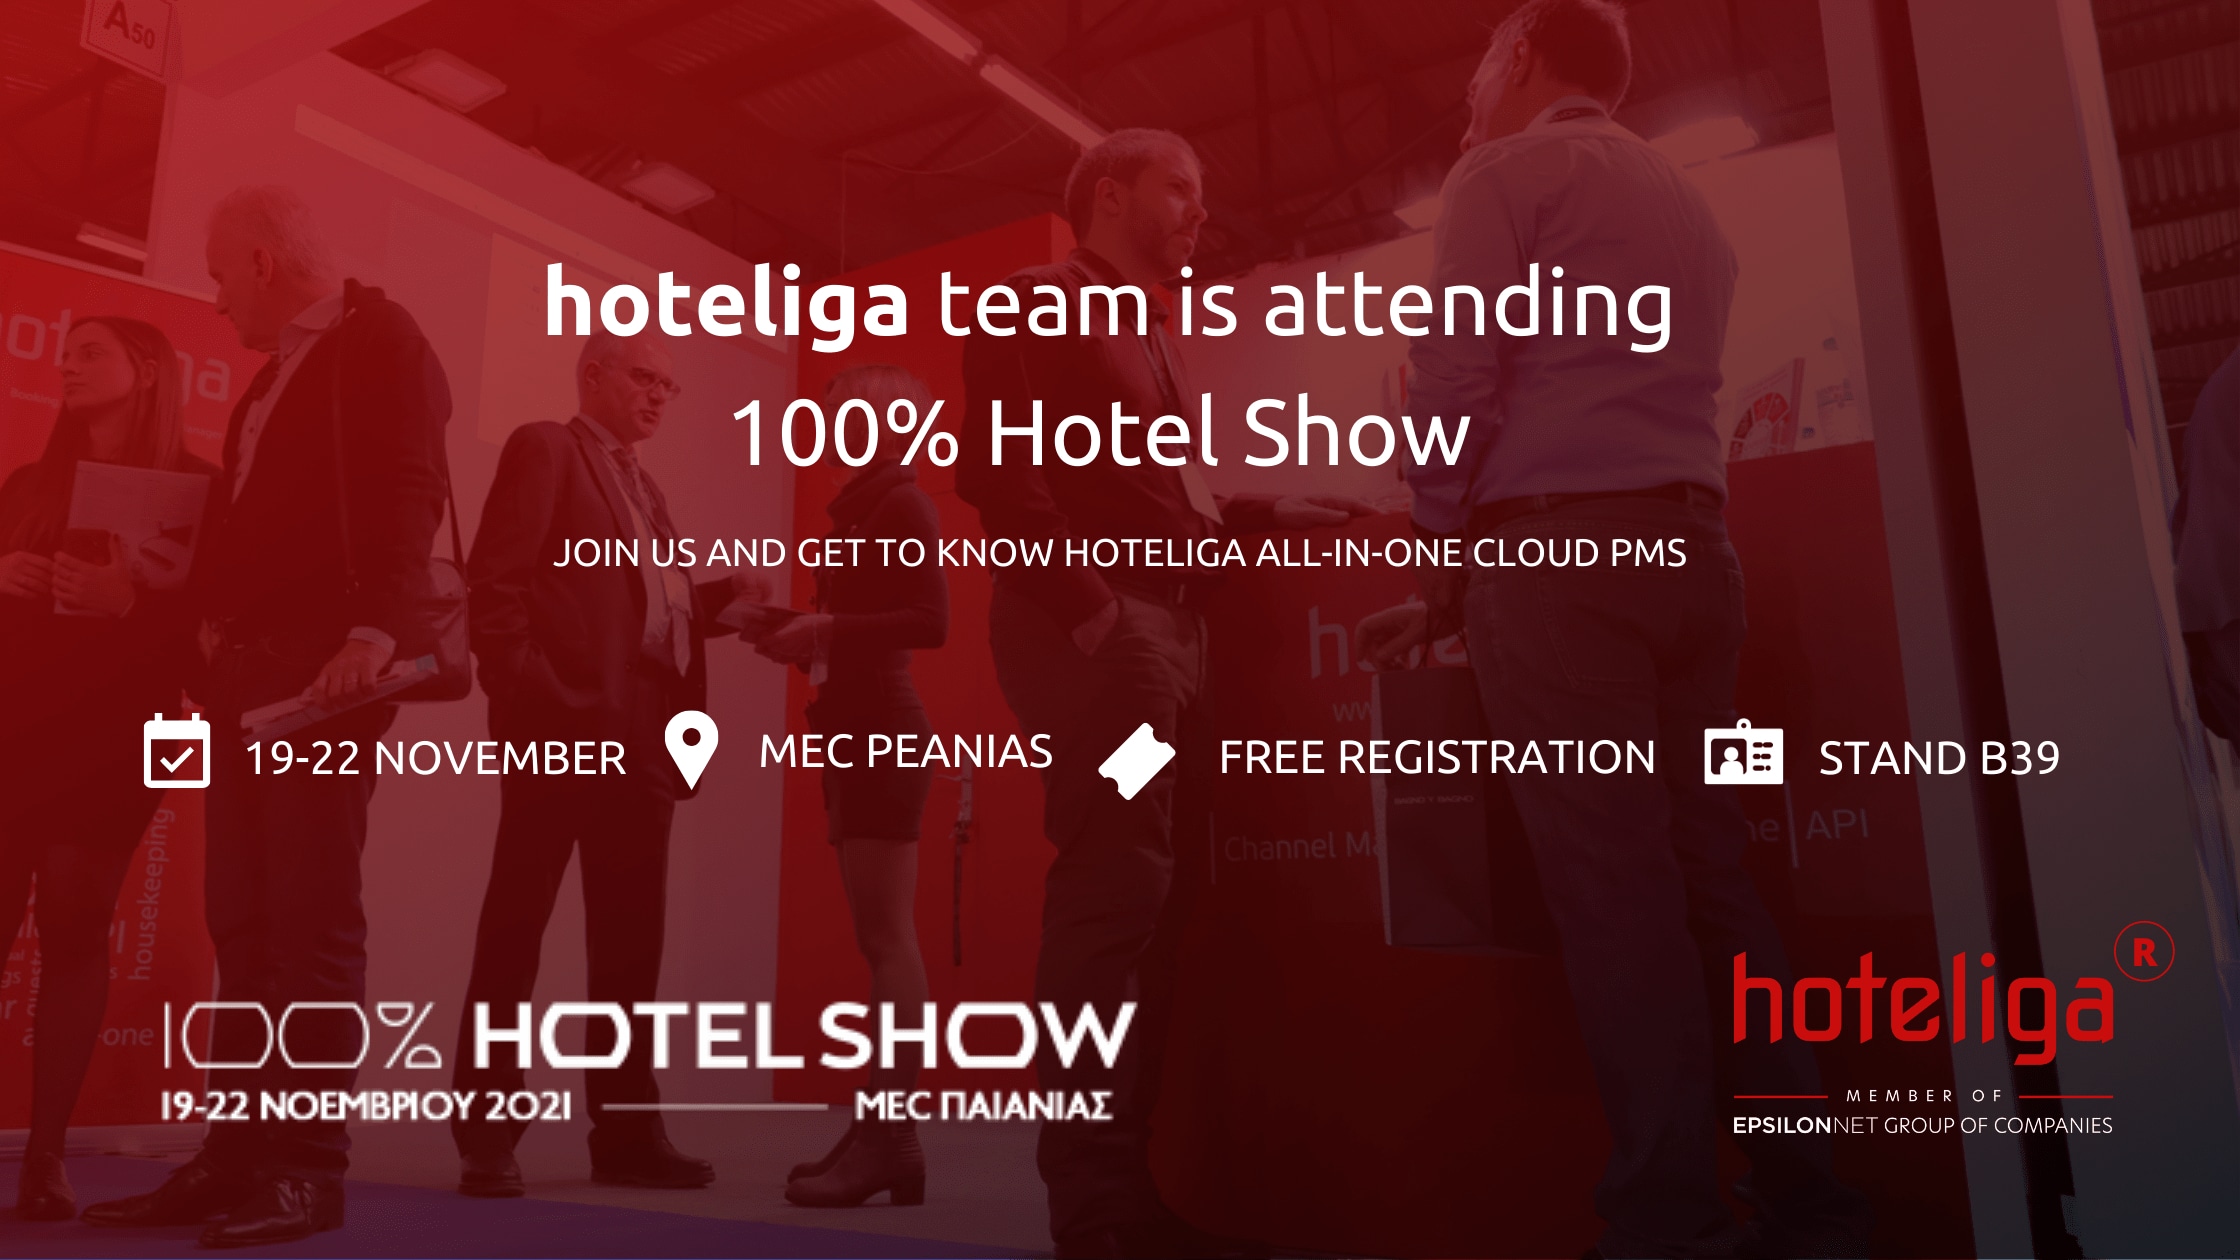 Hoteliga is attending 100% Hotel Show